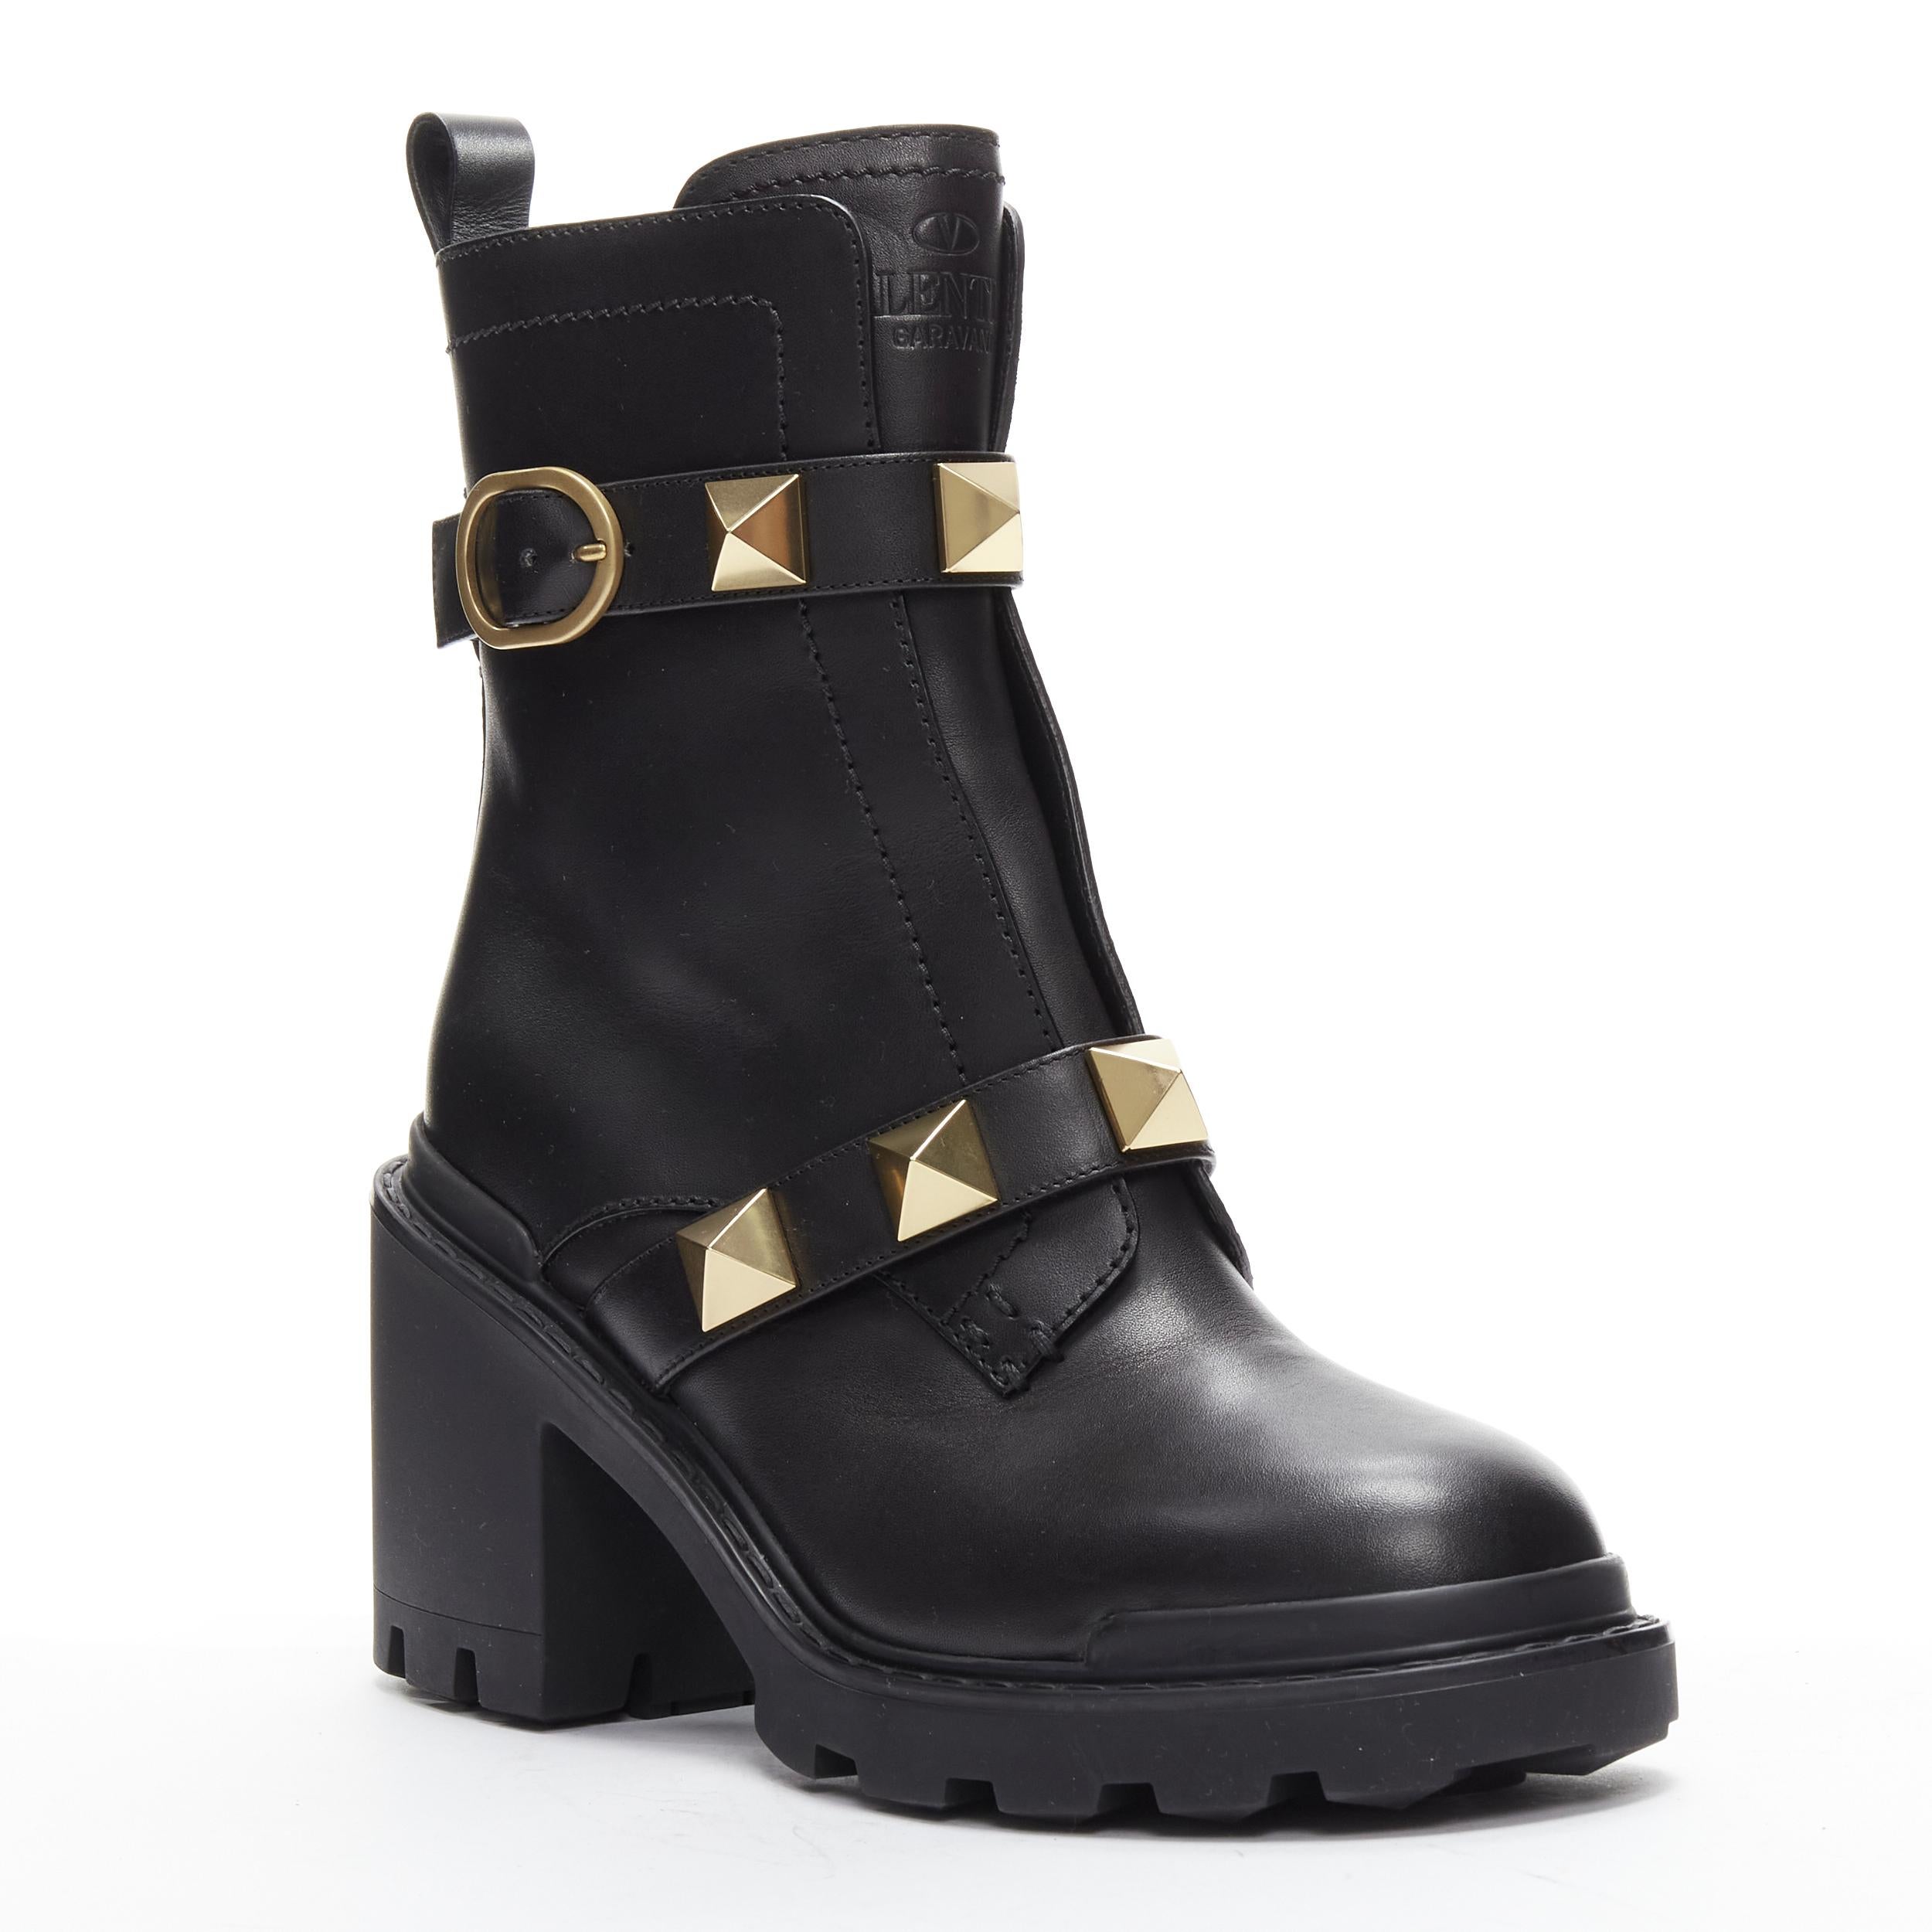 VALENTINO Roman Stud gold tone black leather chunky lug sole platform boots EU38
Reference: AAWC/A00408
Brand: Valentino
Designer: Pier Paolo Piccioli
Collection: Roman Stud
Material: Leather
Color: Black, Gold
Pattern: Solid
Closure: Zip
Lining: